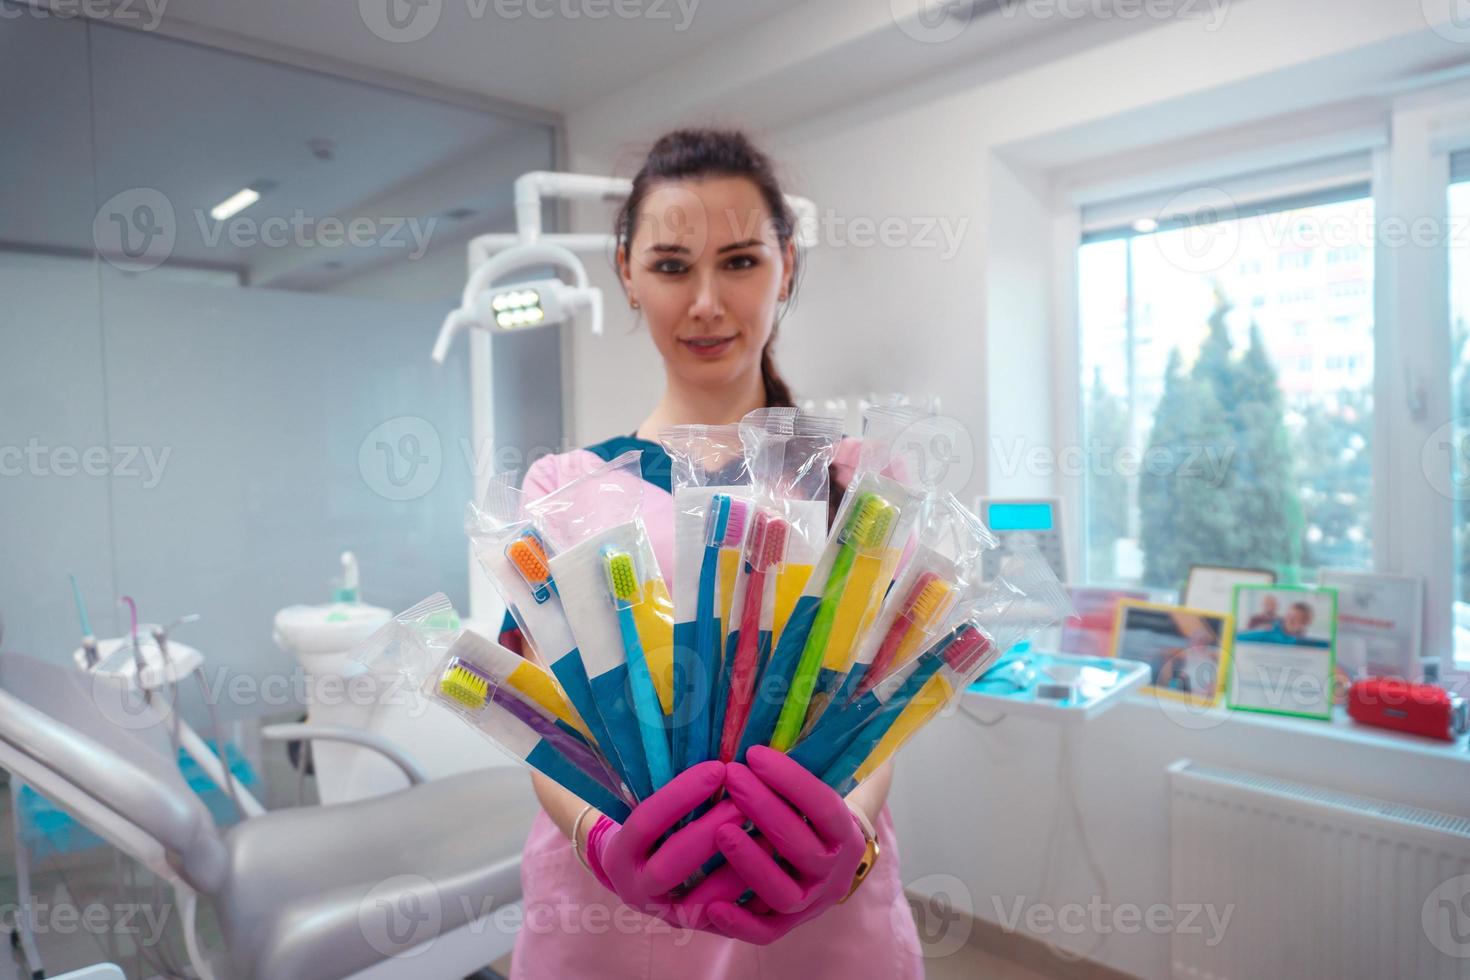 set of toothbrushes in the hands of the dentist photo